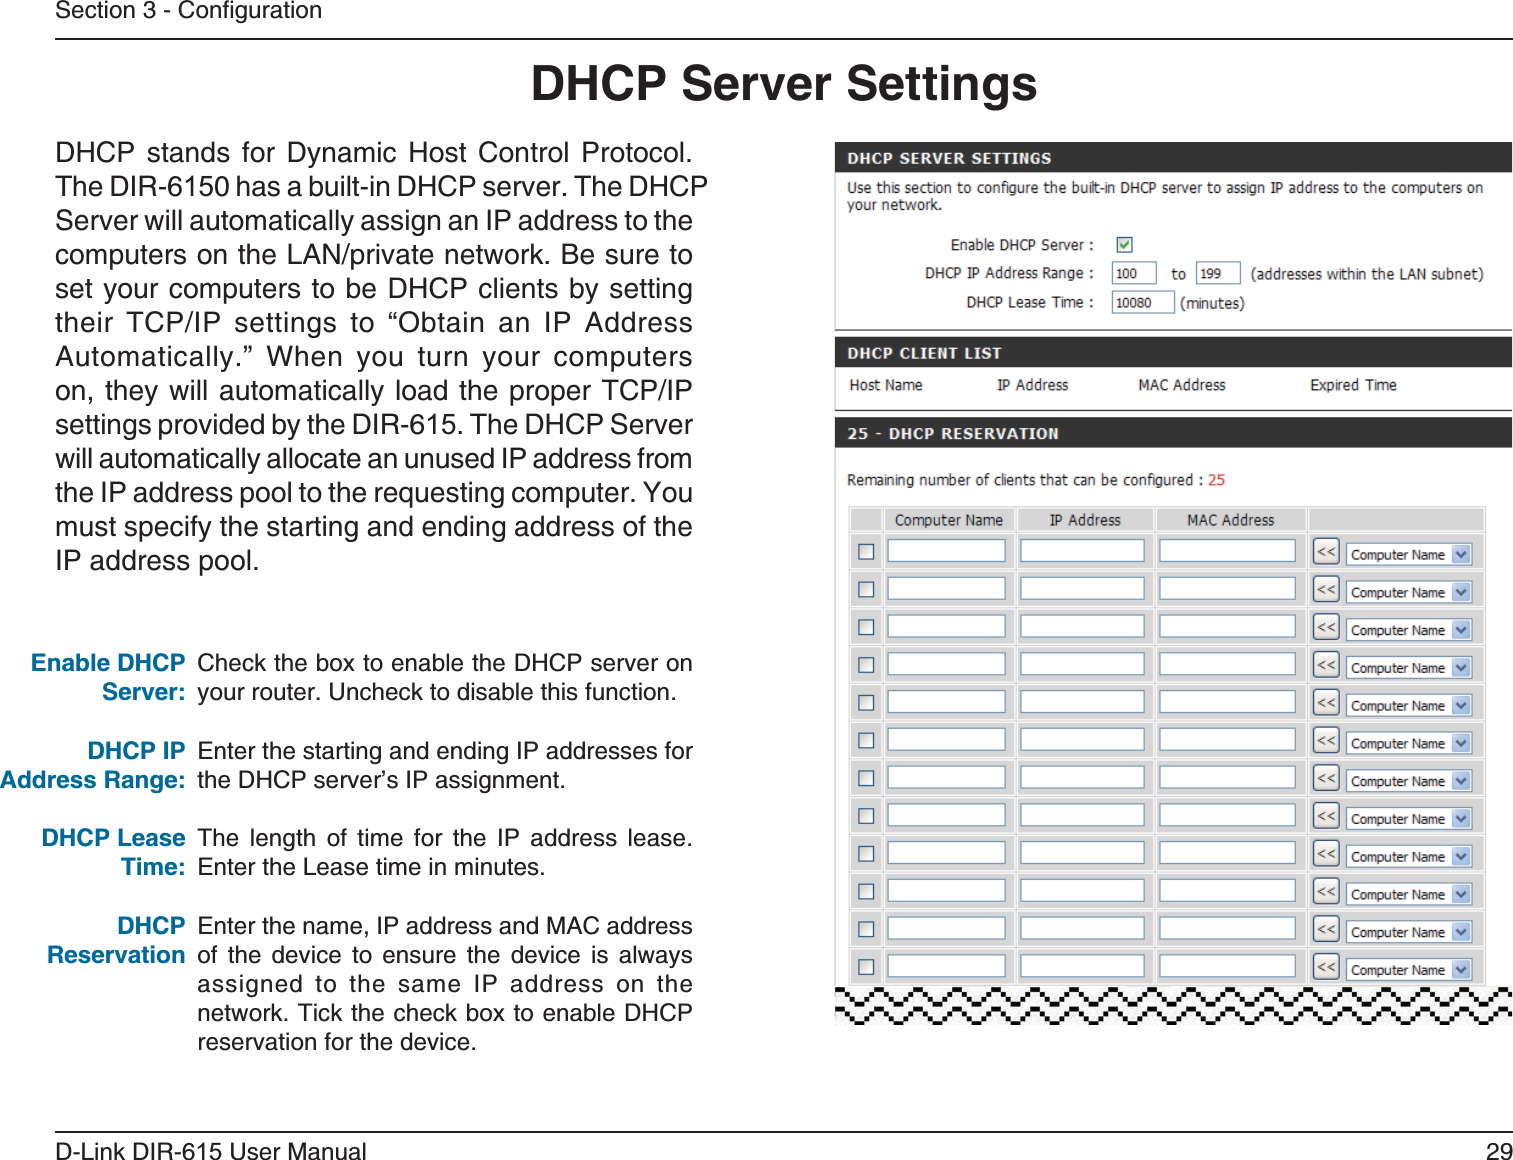 29D-Link DIR-6 User ManualSection 3 - ConfigurationCheck the box to enable the DHCP server on your router. Uncheck to disable this function.Enter the starting and ending IP addresses for the DHCP server’s IP assignment.The length of time for the IP address lease. Enter the Lease time in minutes.Enter the name, IP address and MAC address of the device to ensure the device is always assigned to the same IP address on the network. Tick the check box to enable DHCP reservation for the device.DHCP stands for Dynamic Host Control Protocol. The DIR-60 has a built-in DHCP server. The DHCP Server will automatically assign an IP address to the computers on the LAN/private network. Be sure to set your computers to be DHCP clients by setting their TCP/IP settings to “Obtain an IP Address Automatically.” When you turn your computers on, they will automatically load the proper TCP/IP settings provided by the DIR-6. The DHCP Server will automatically allocate an unused IP address from the IP address pool to the requesting computer. You must specify the starting and ending address of the IP address pool.